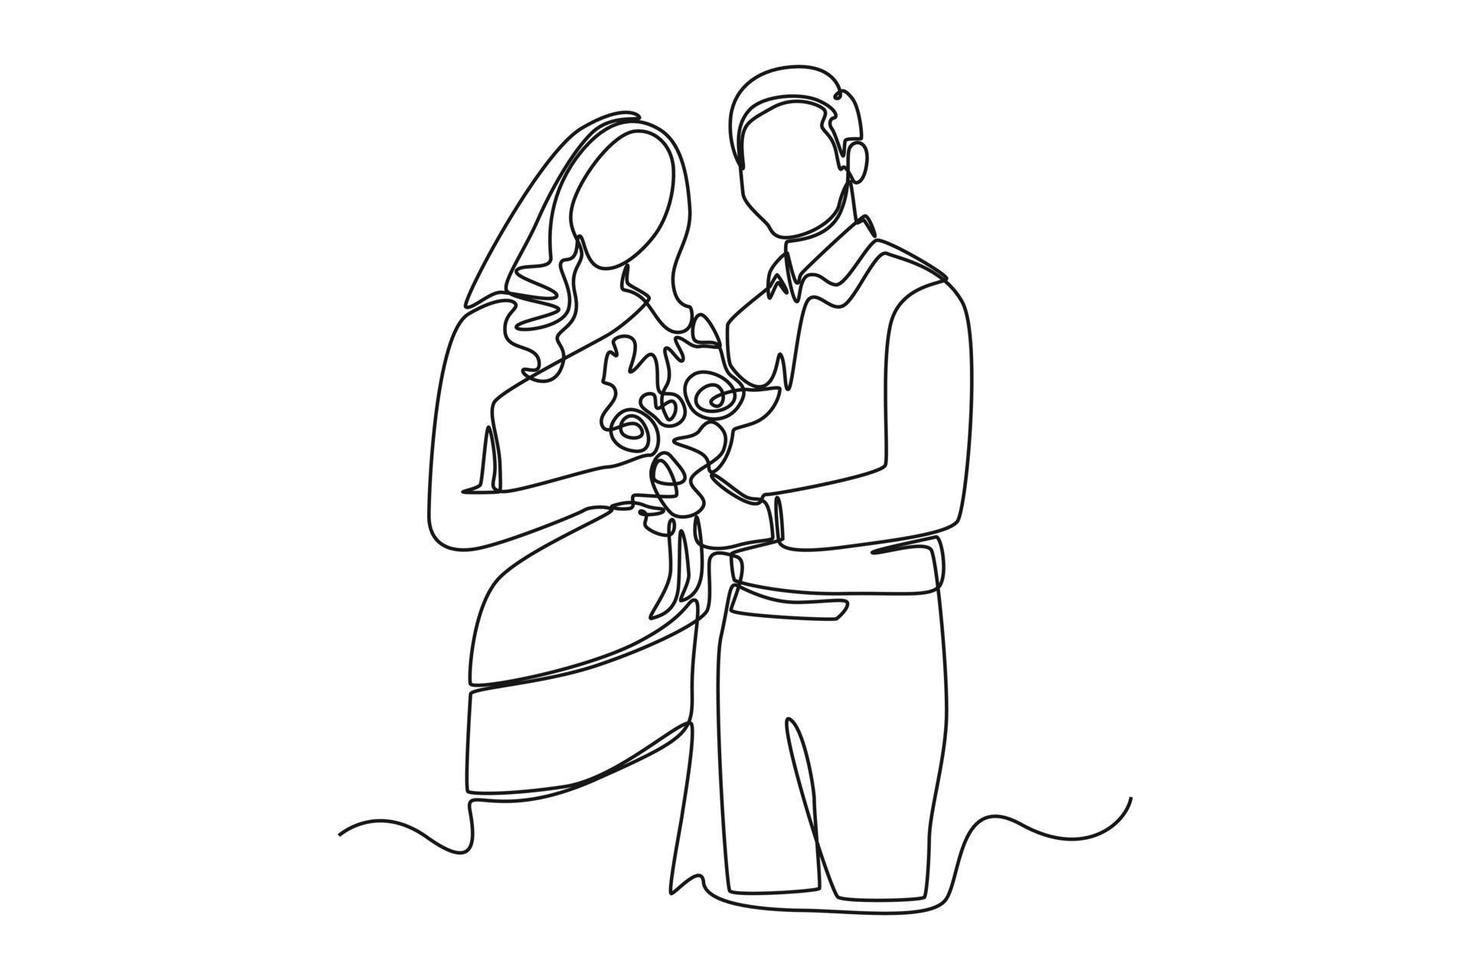 Continuous one line drawing Bride in a dress and groom standing together while holding a wedding bouquet of flowers. Wedding Concept. Single line draw design vector graphic illustration.